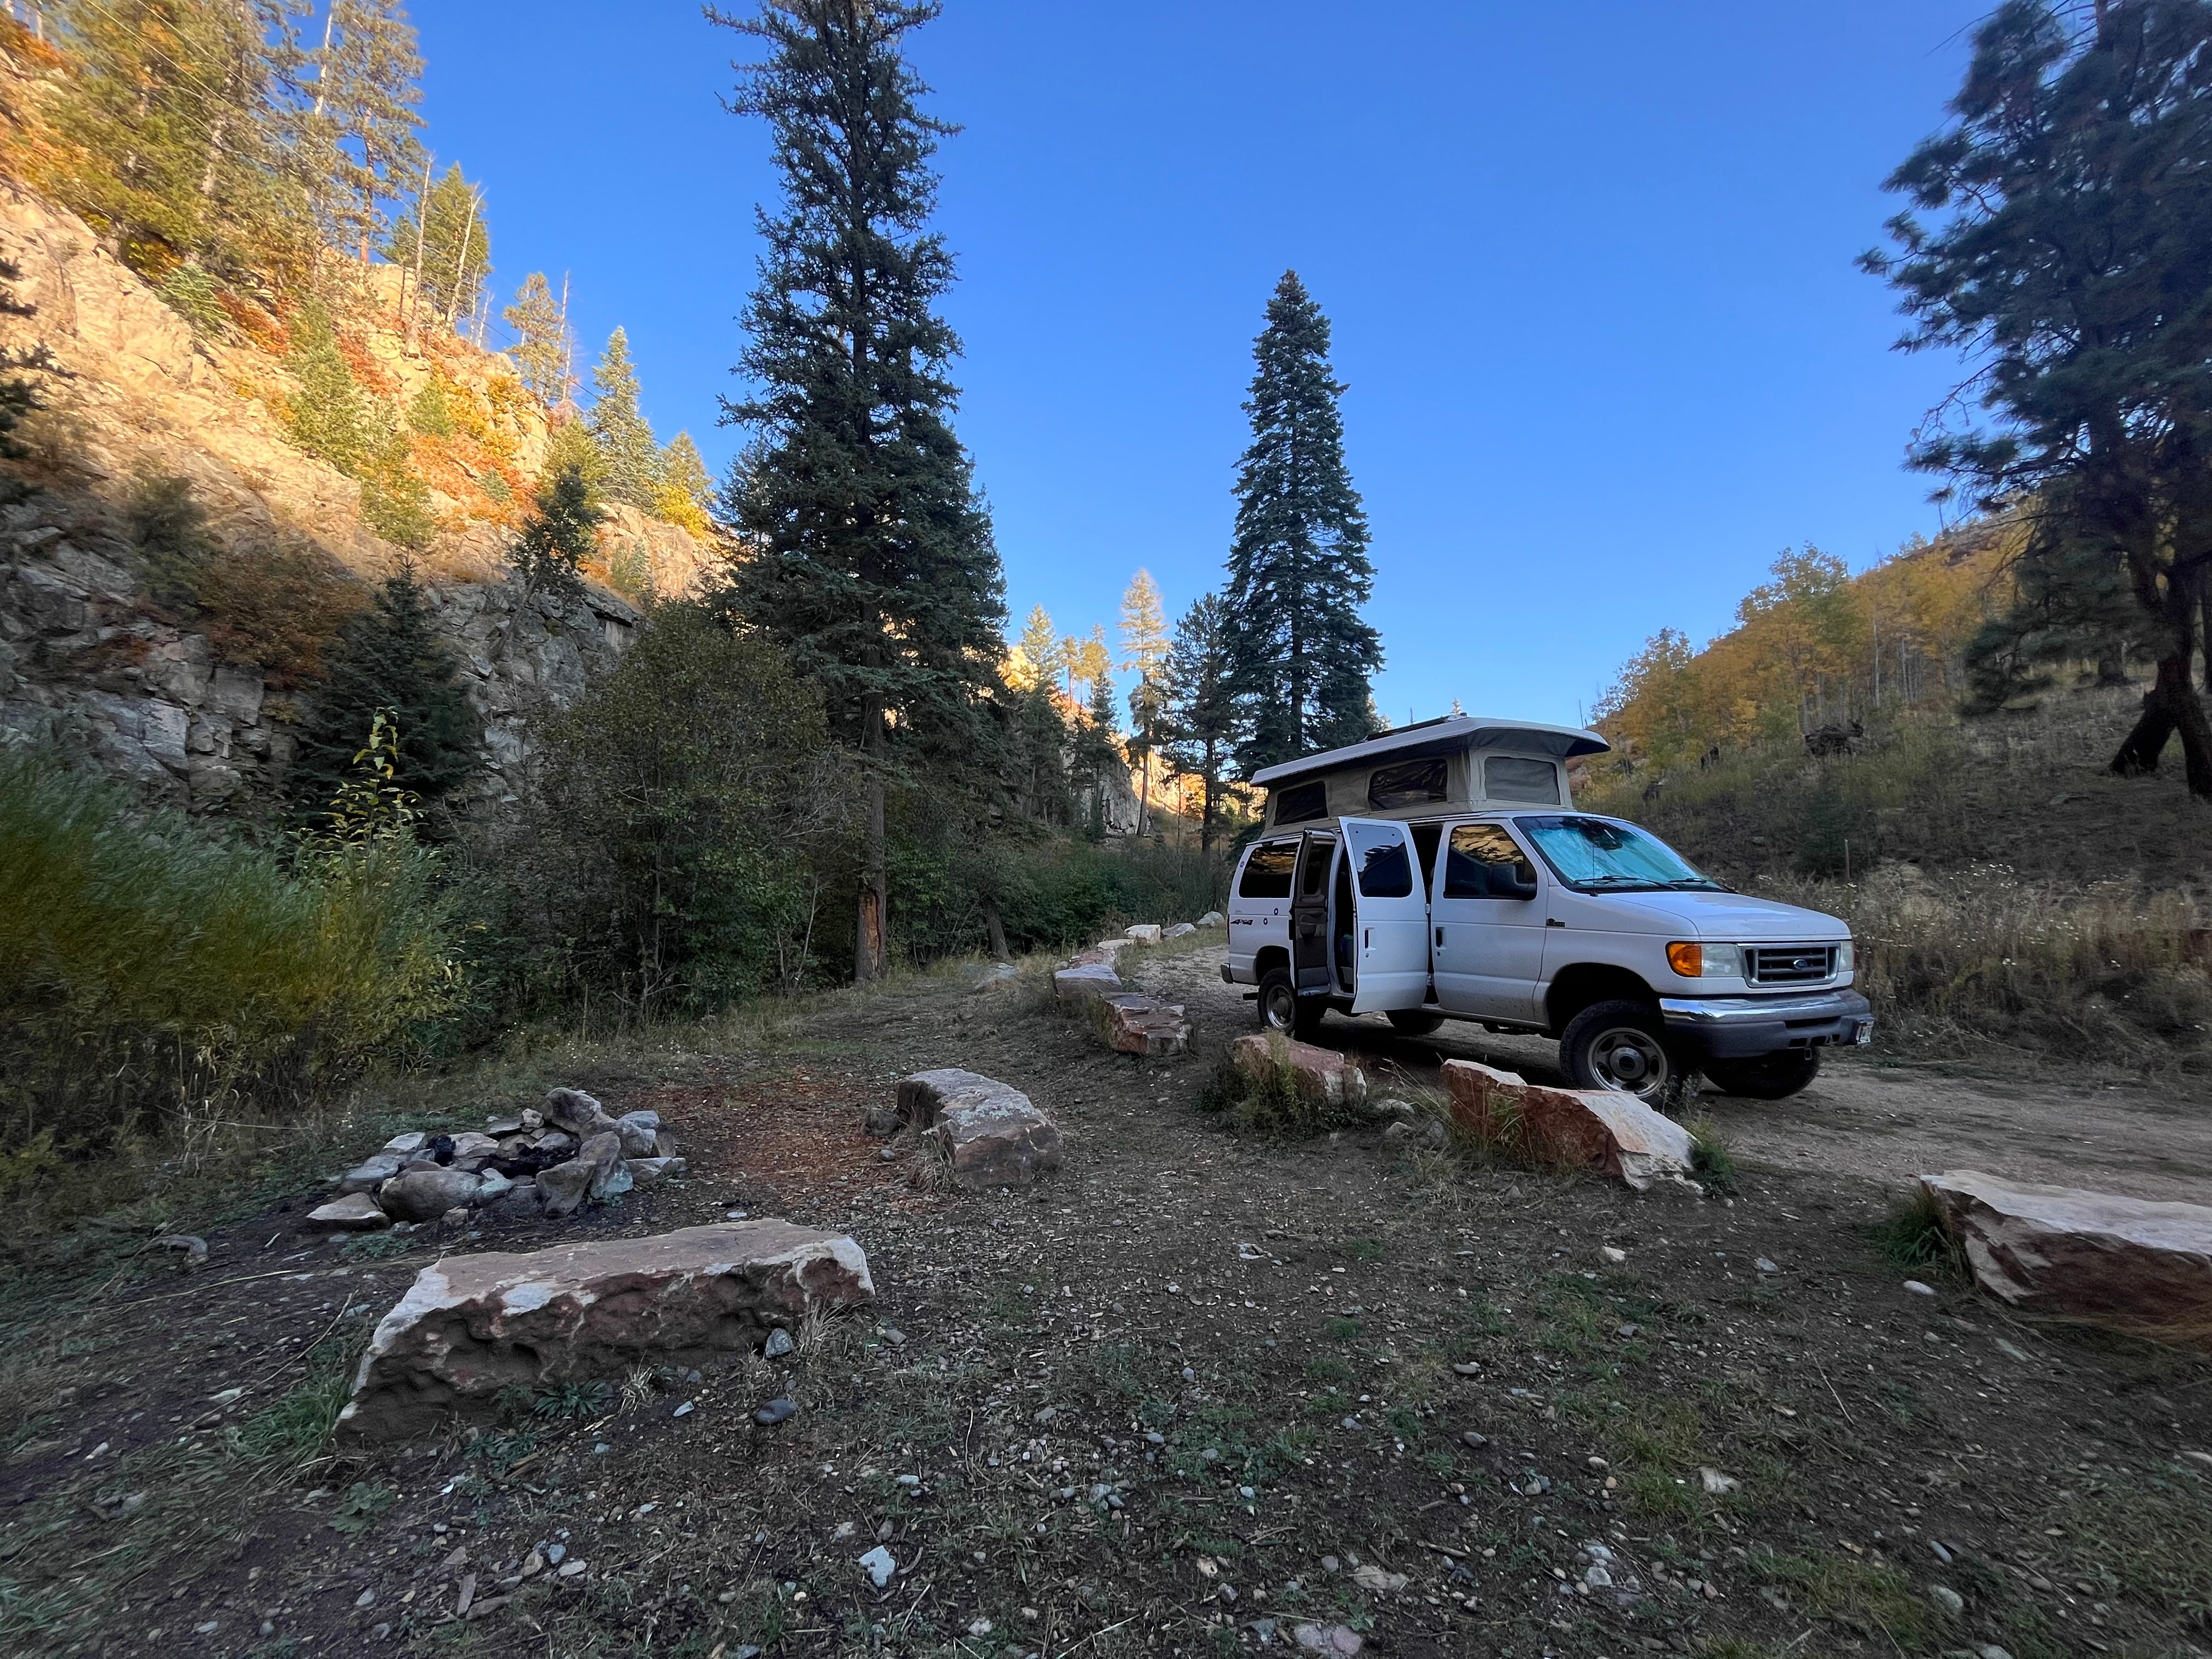 Camper submitted image from Cow Creek Dispersed Camping Area - 4